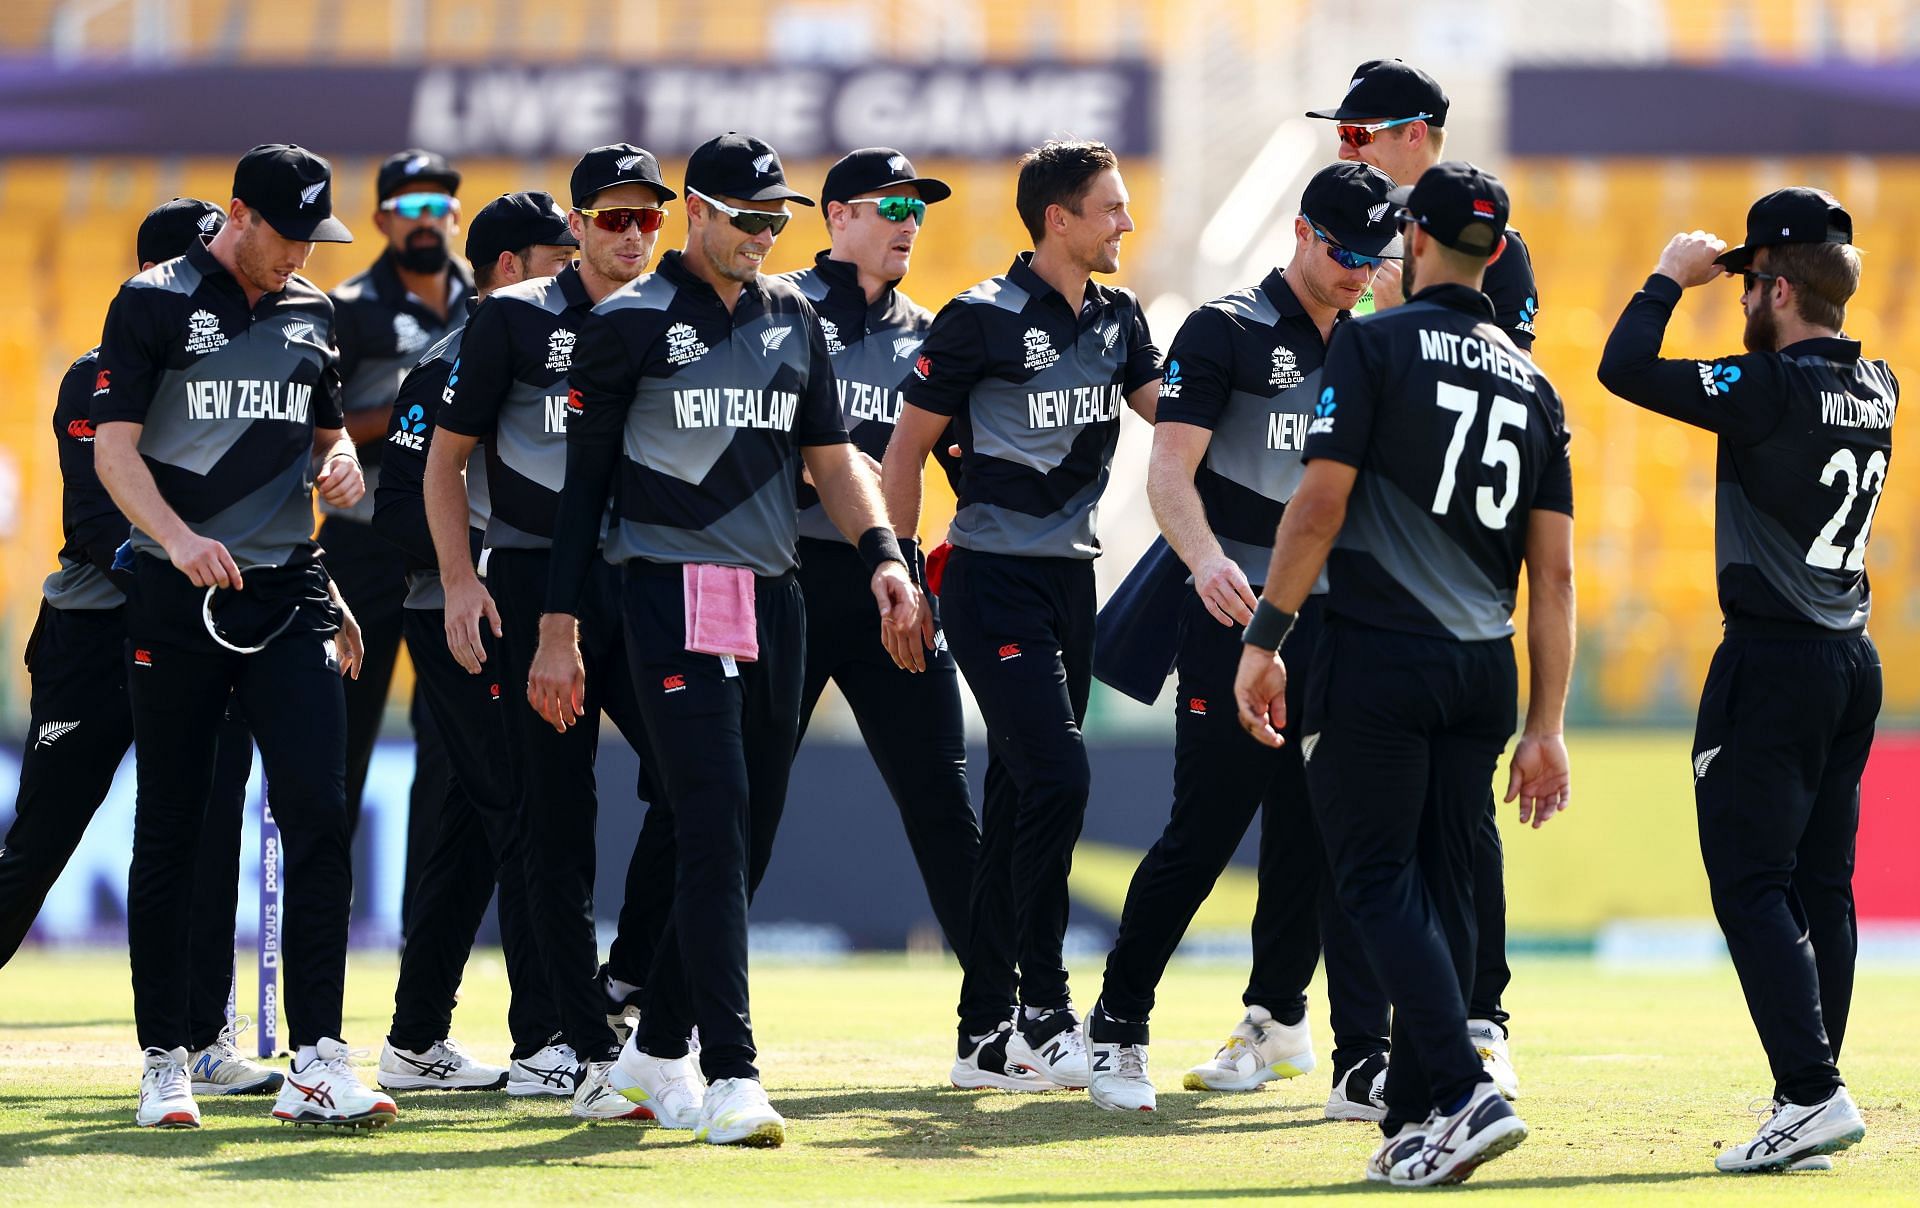 New Zealand v Afghanistan - T20 World Cup 2021